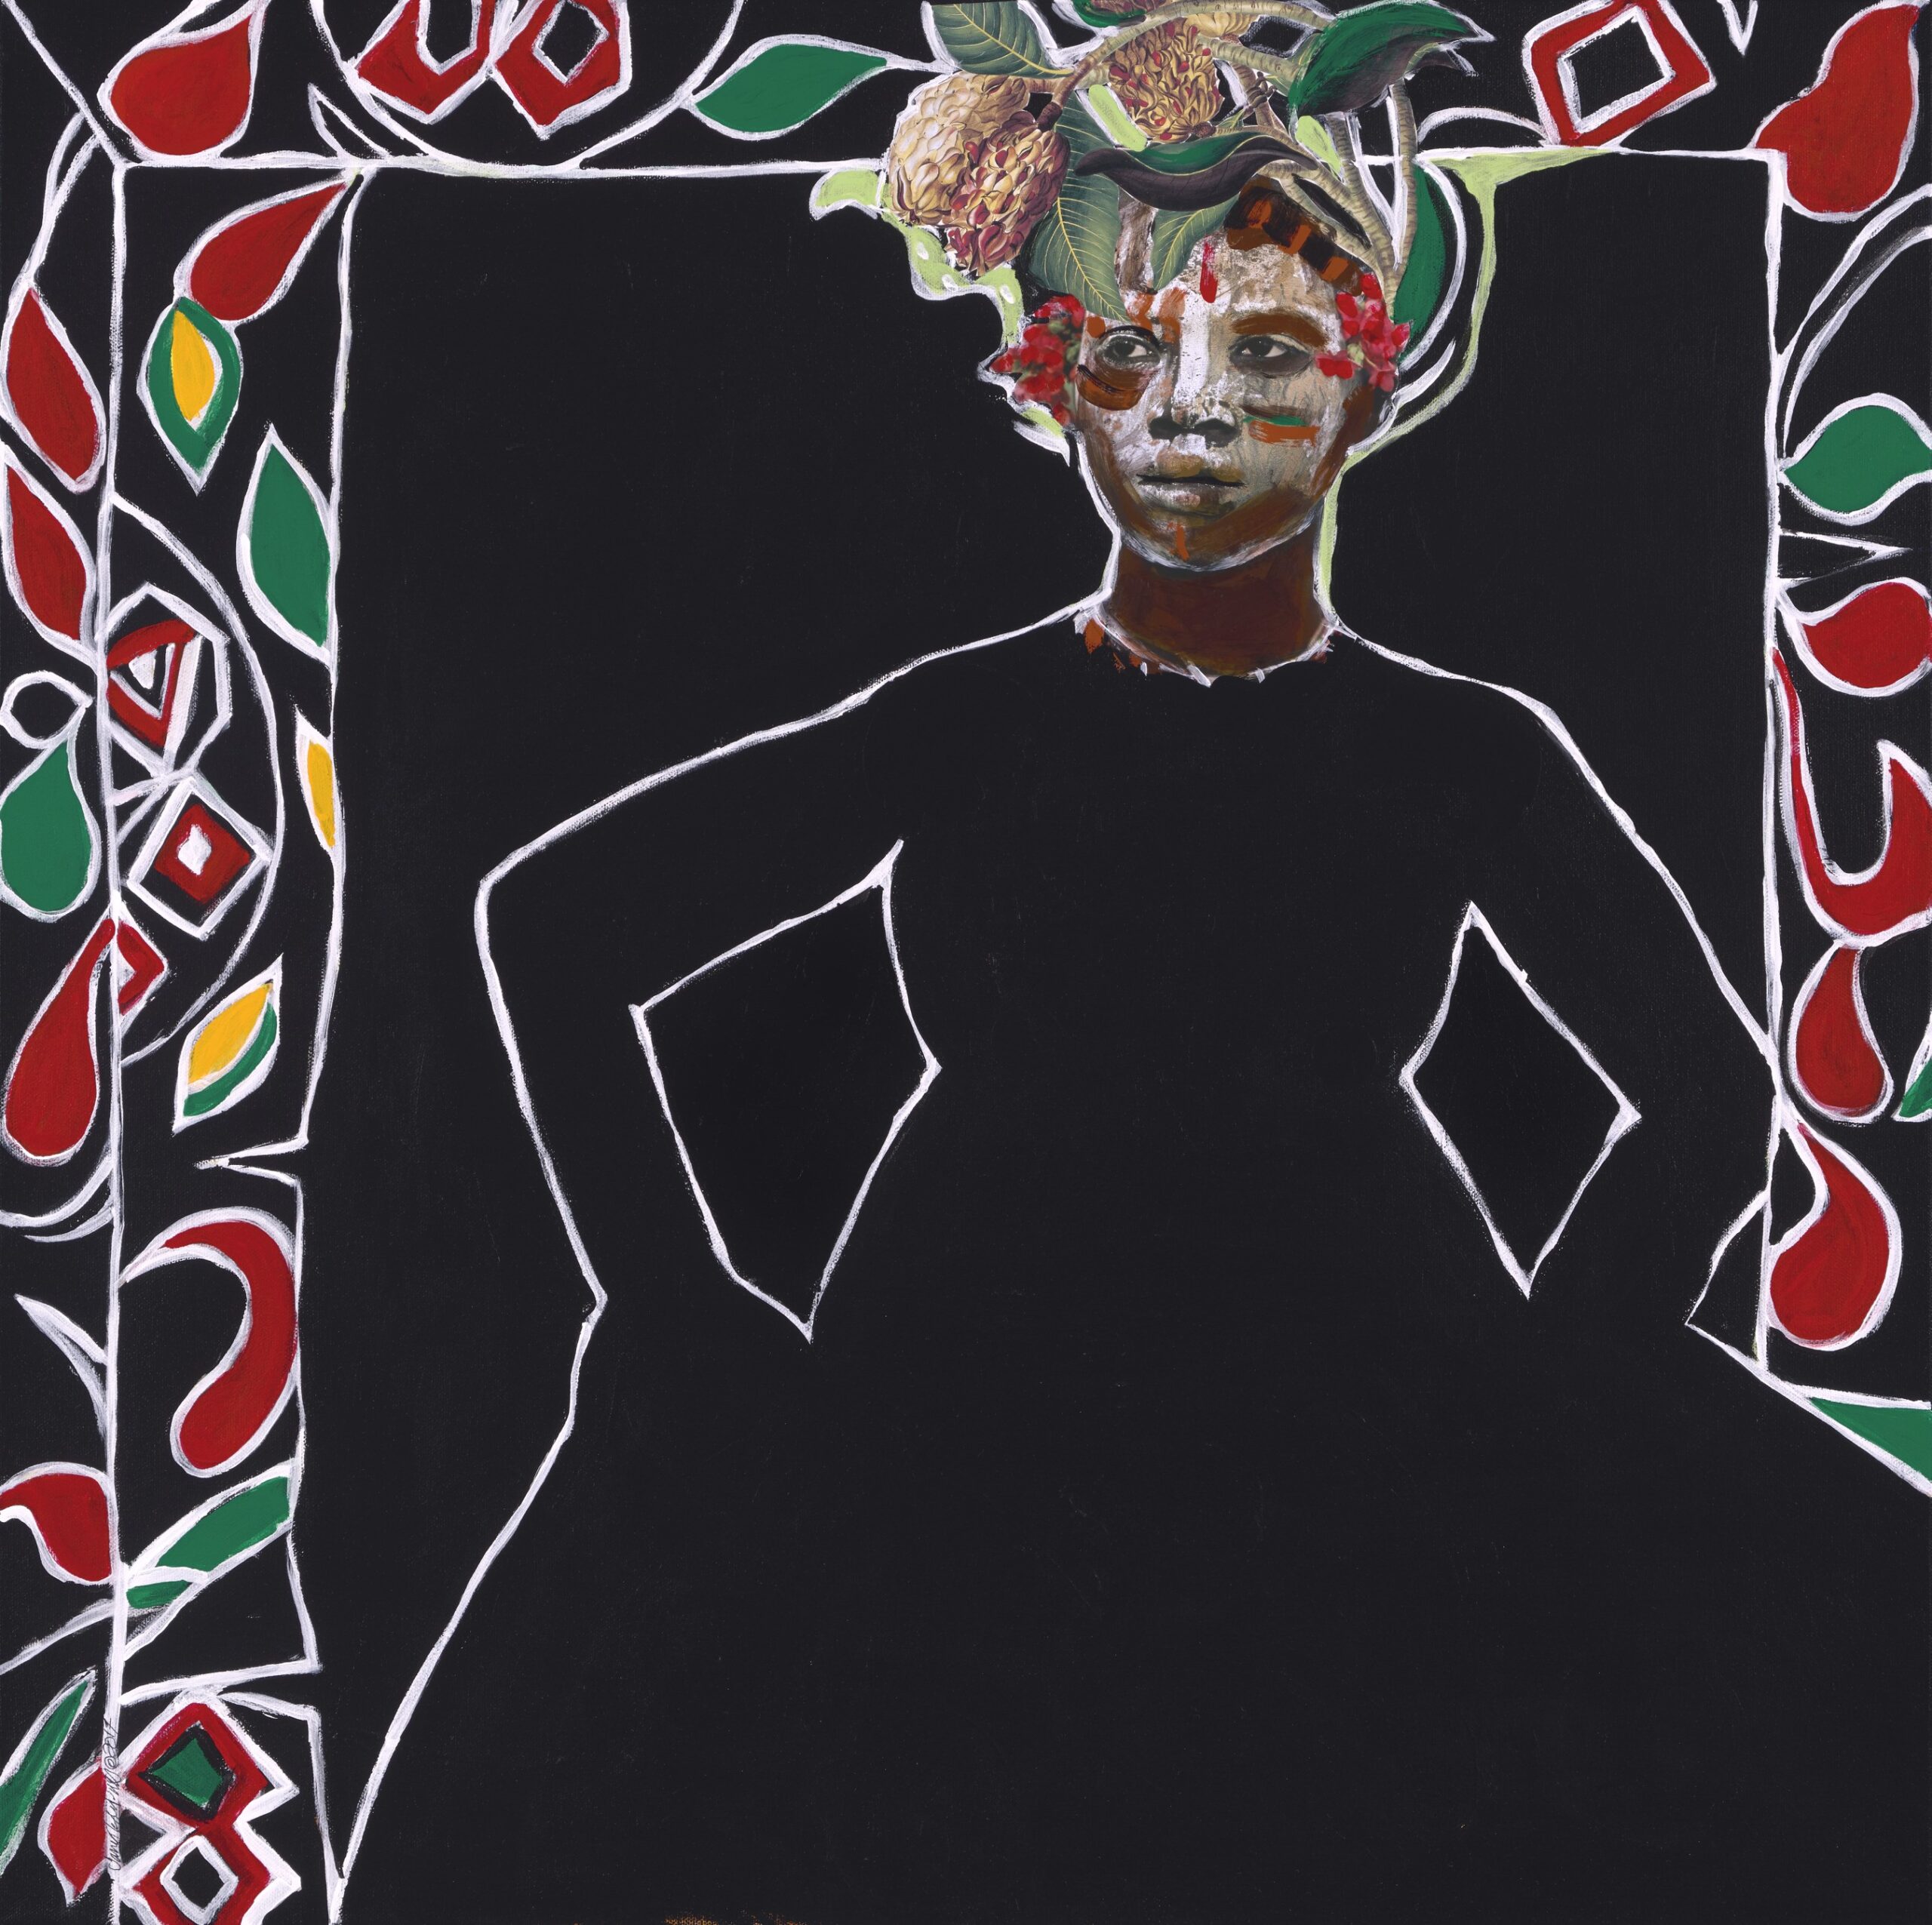 Janet Taylor Pickett, "And She was Born," 2017. Acrylic on canvas with printed paper collage; 30 in. x 30 in. The Phillips Collection: The Dreier Fund for Acquisitions, 2020. © Janet Taylor Pickett, courtesy Jennifer Baahng Gallery. 